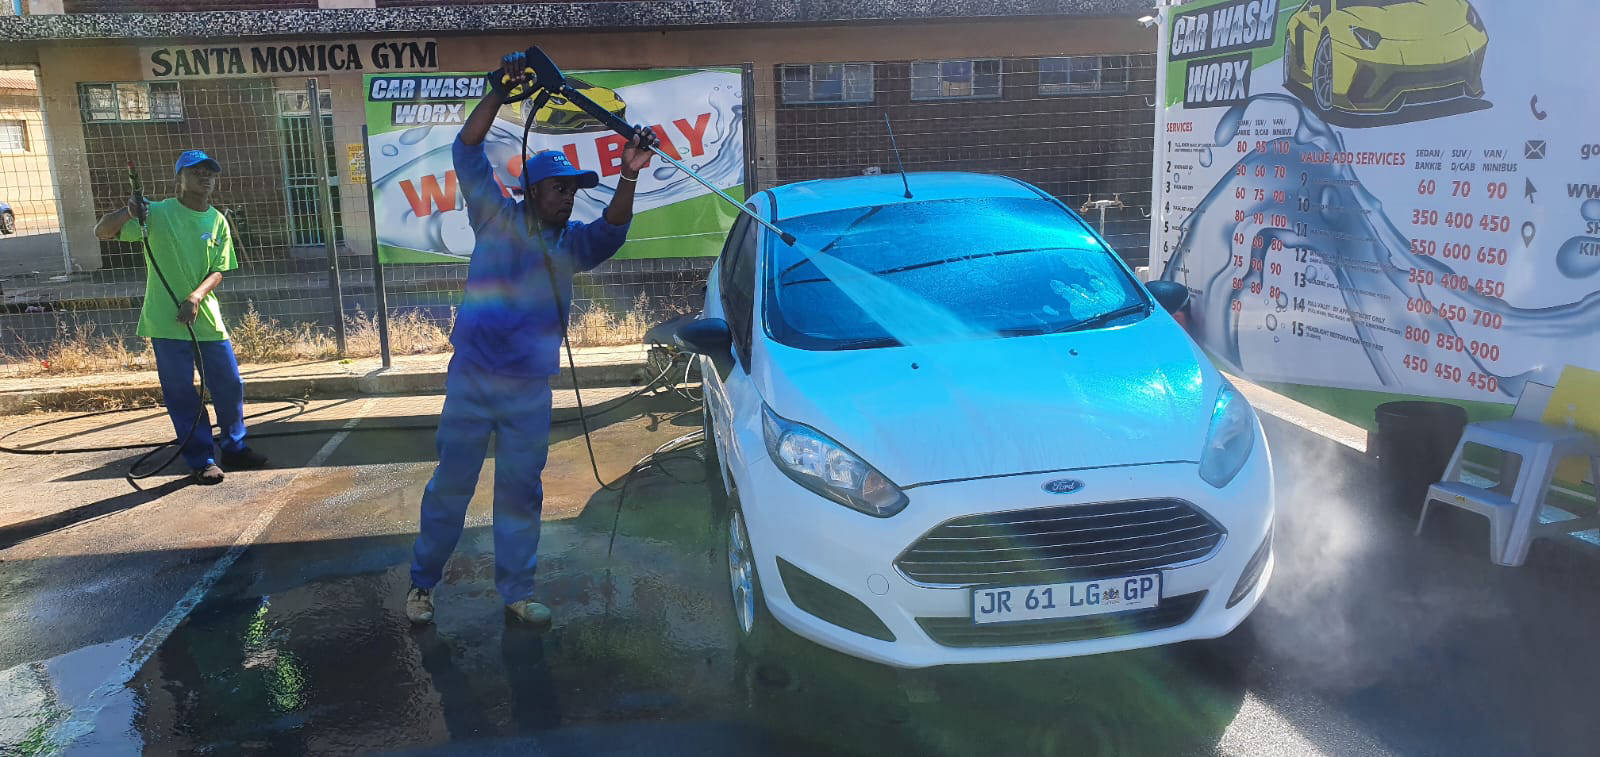 CarWash Worx Brakpan Branch, Car Wash Franchises Available, CarWash Worx Head Office, Join The Leading Car Wash Franchising Group, Start Your Own Successful Car Wash Business Now